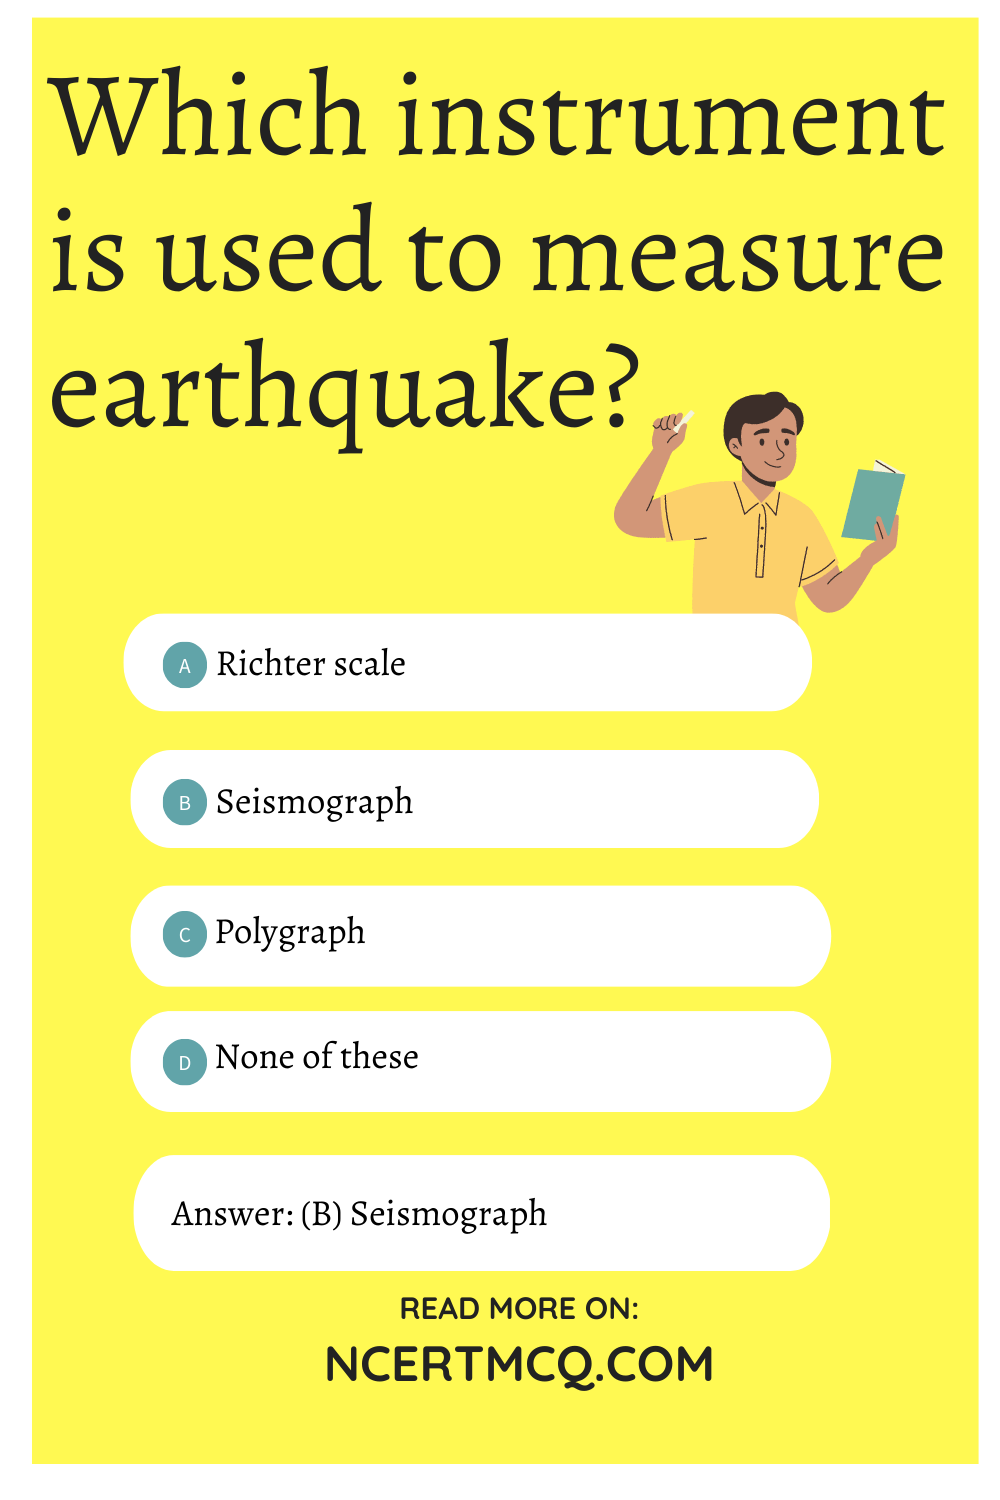 Which instrument is used to measure earthquake?